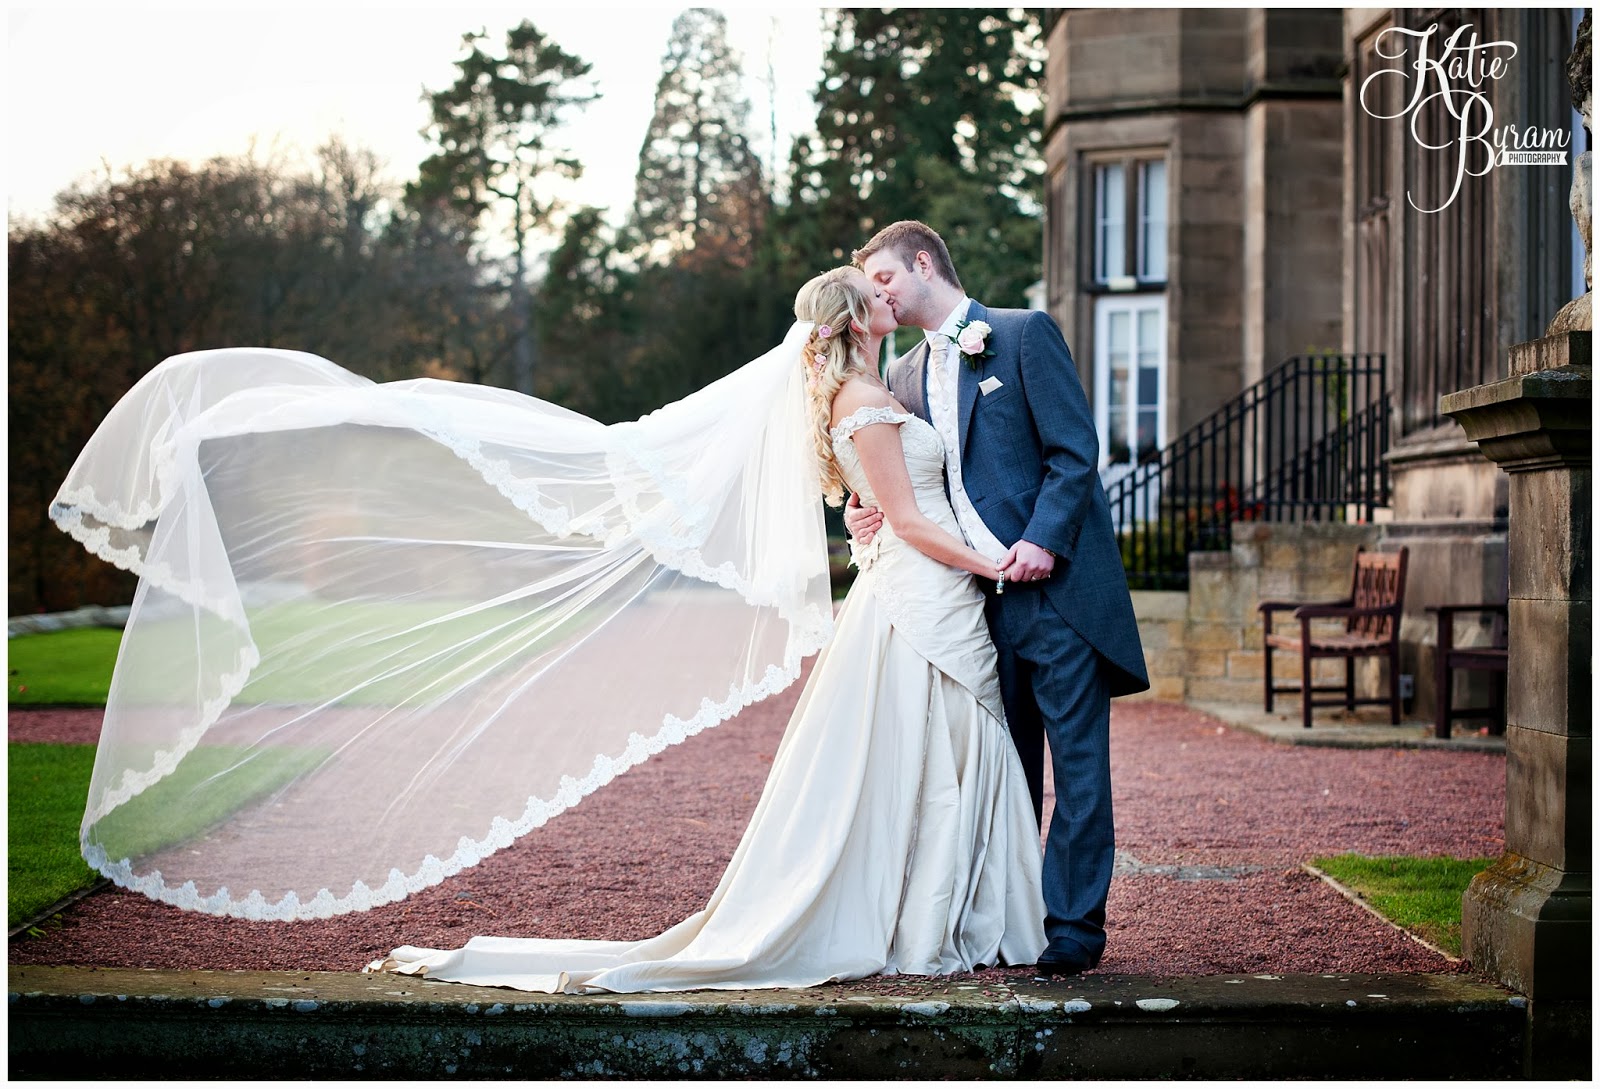 cathedral length veil, wedding veil, matfen hall wedding, matfen wedding, northumberland wedding, katie byram photography, vintage wedding, quirky wedding photography, north east wedding, north east wedding venue, great hall matfen, event diva, by wendy, just perfect,